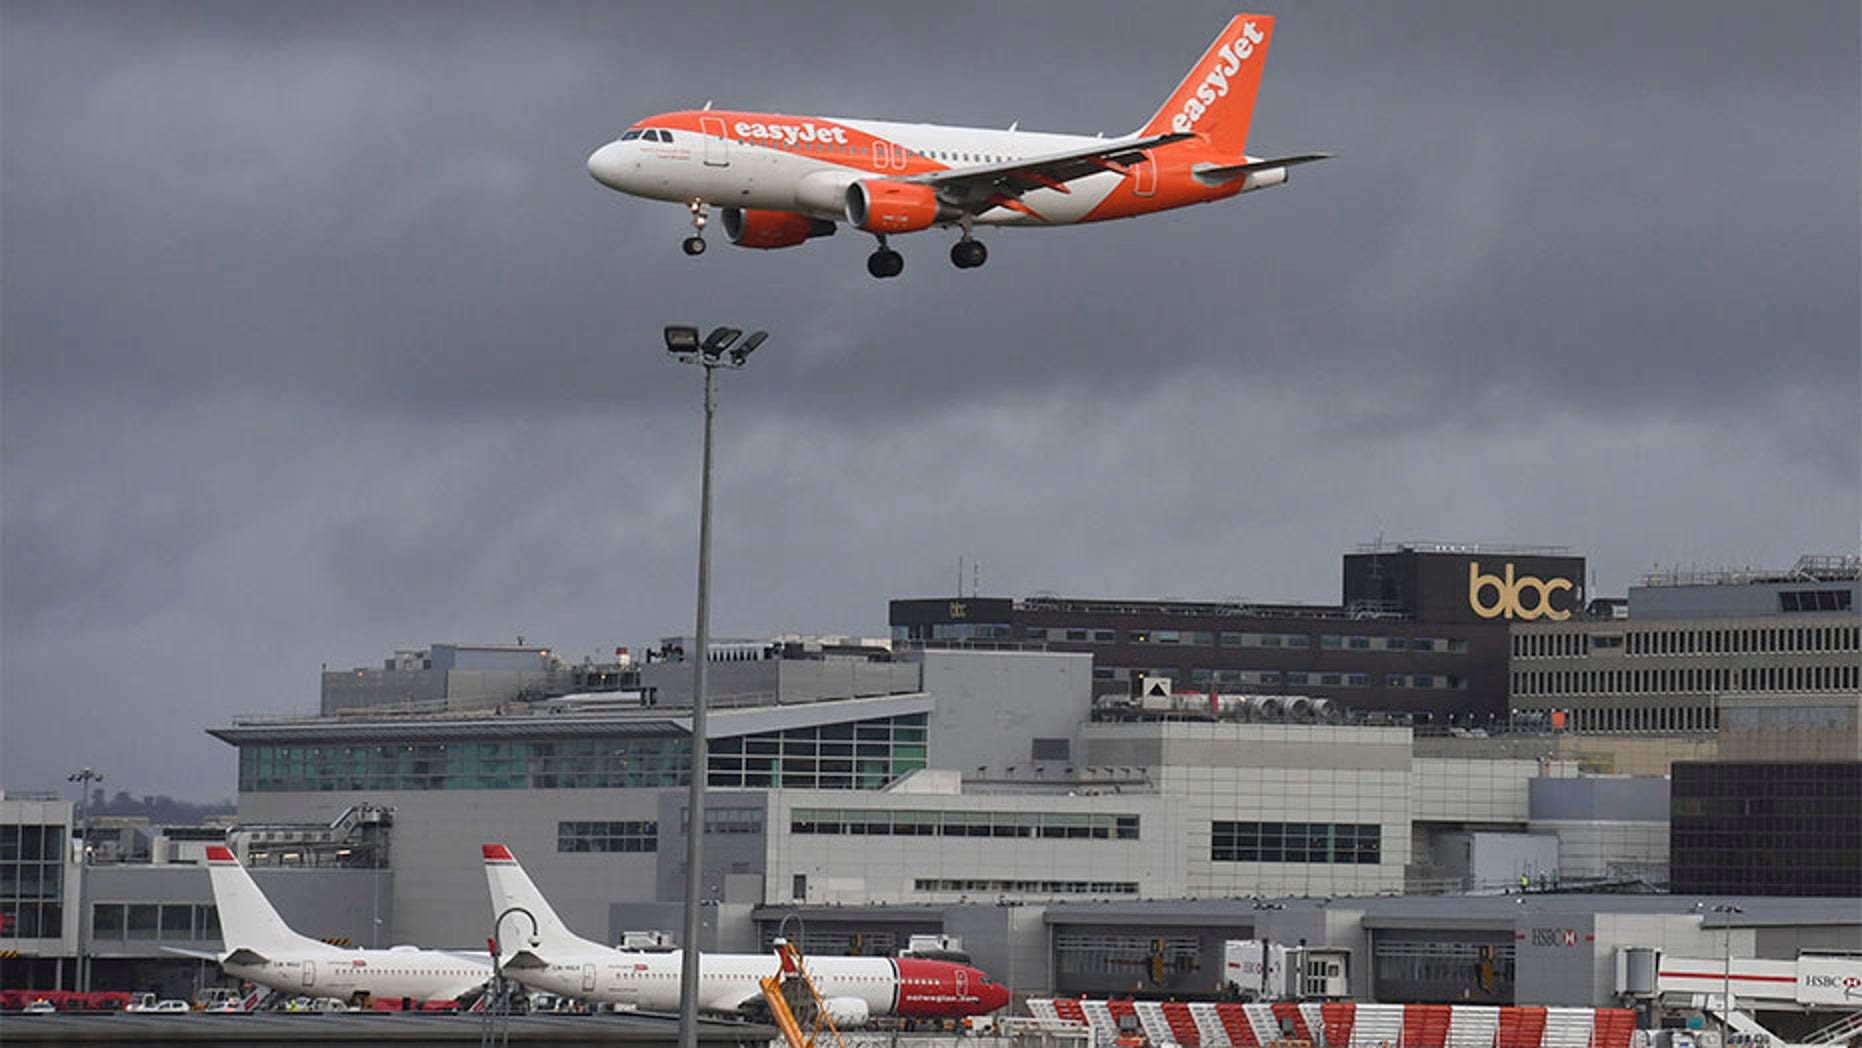   An EasyJet plan on its last approach before landing at Gatwick Airport near London on Friday. 